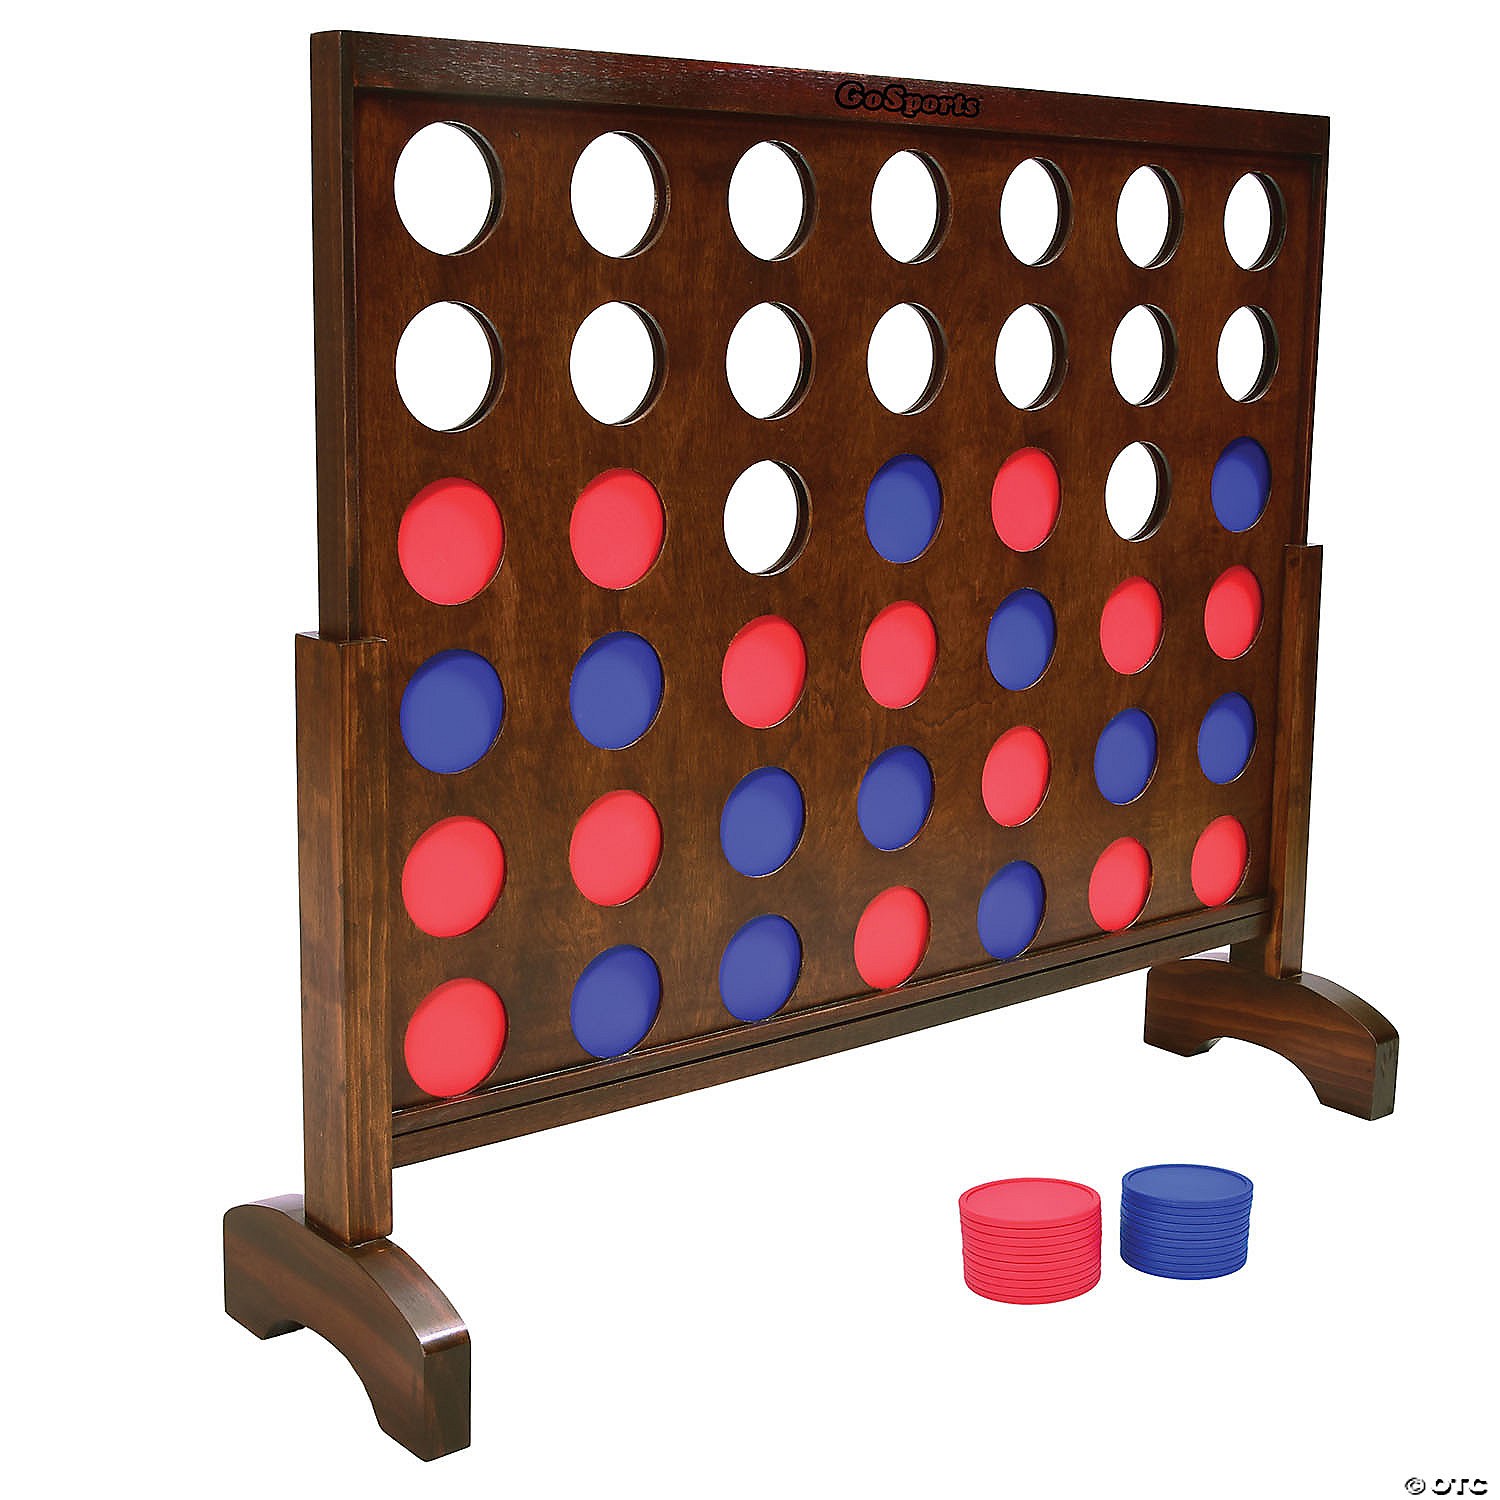 https://s7.orientaltrading.com/is/image/OrientalTrading/VIEWER_ZOOM/gosports-giant-dark-wood-stain-4-in-a-row-backyard-game-3~14093276